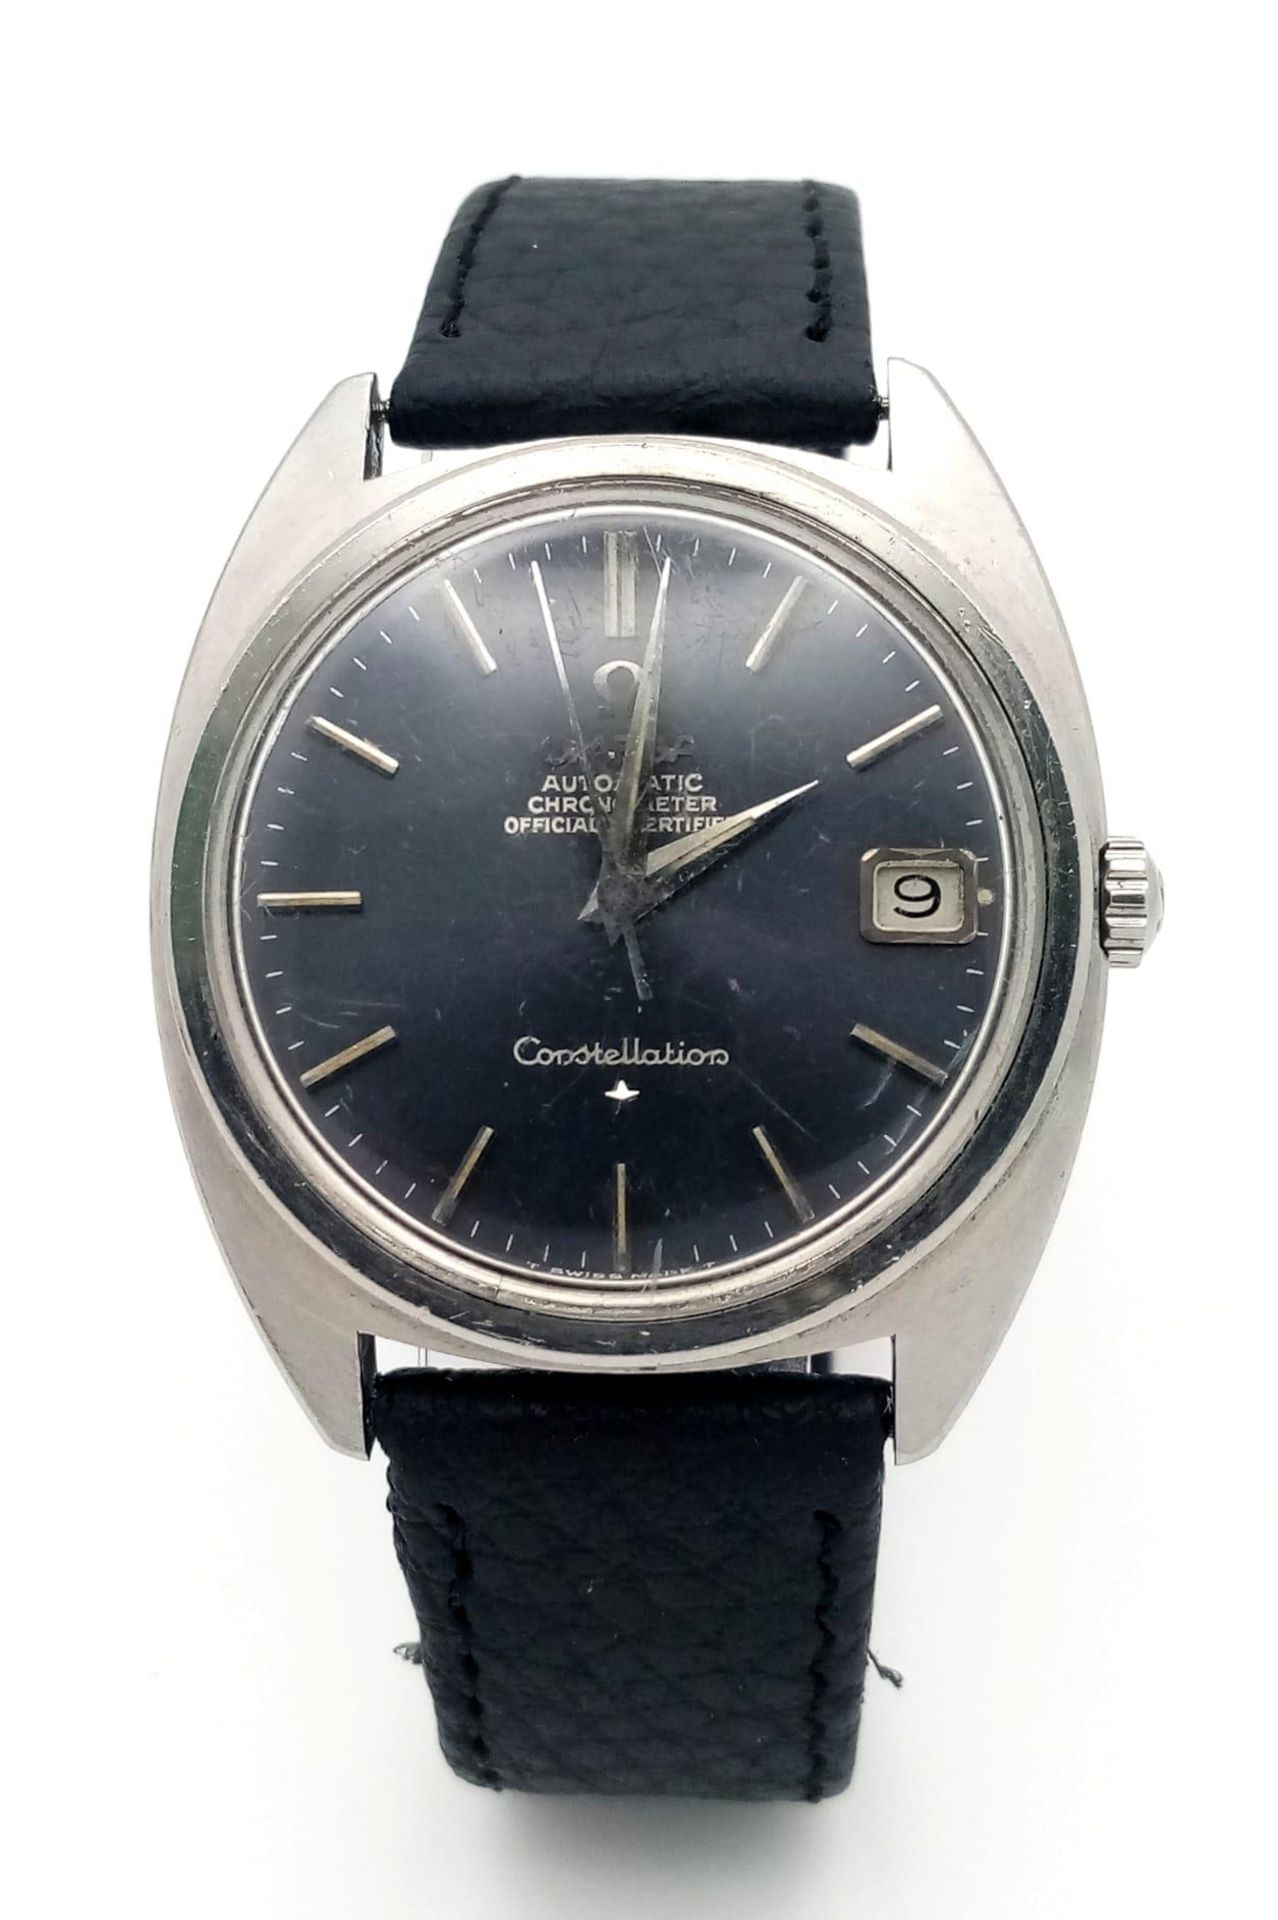 A Vintage Automatic Omega Constellation. Black leather strap. Stainless steel case - 36mm. Grey dial - Image 3 of 7